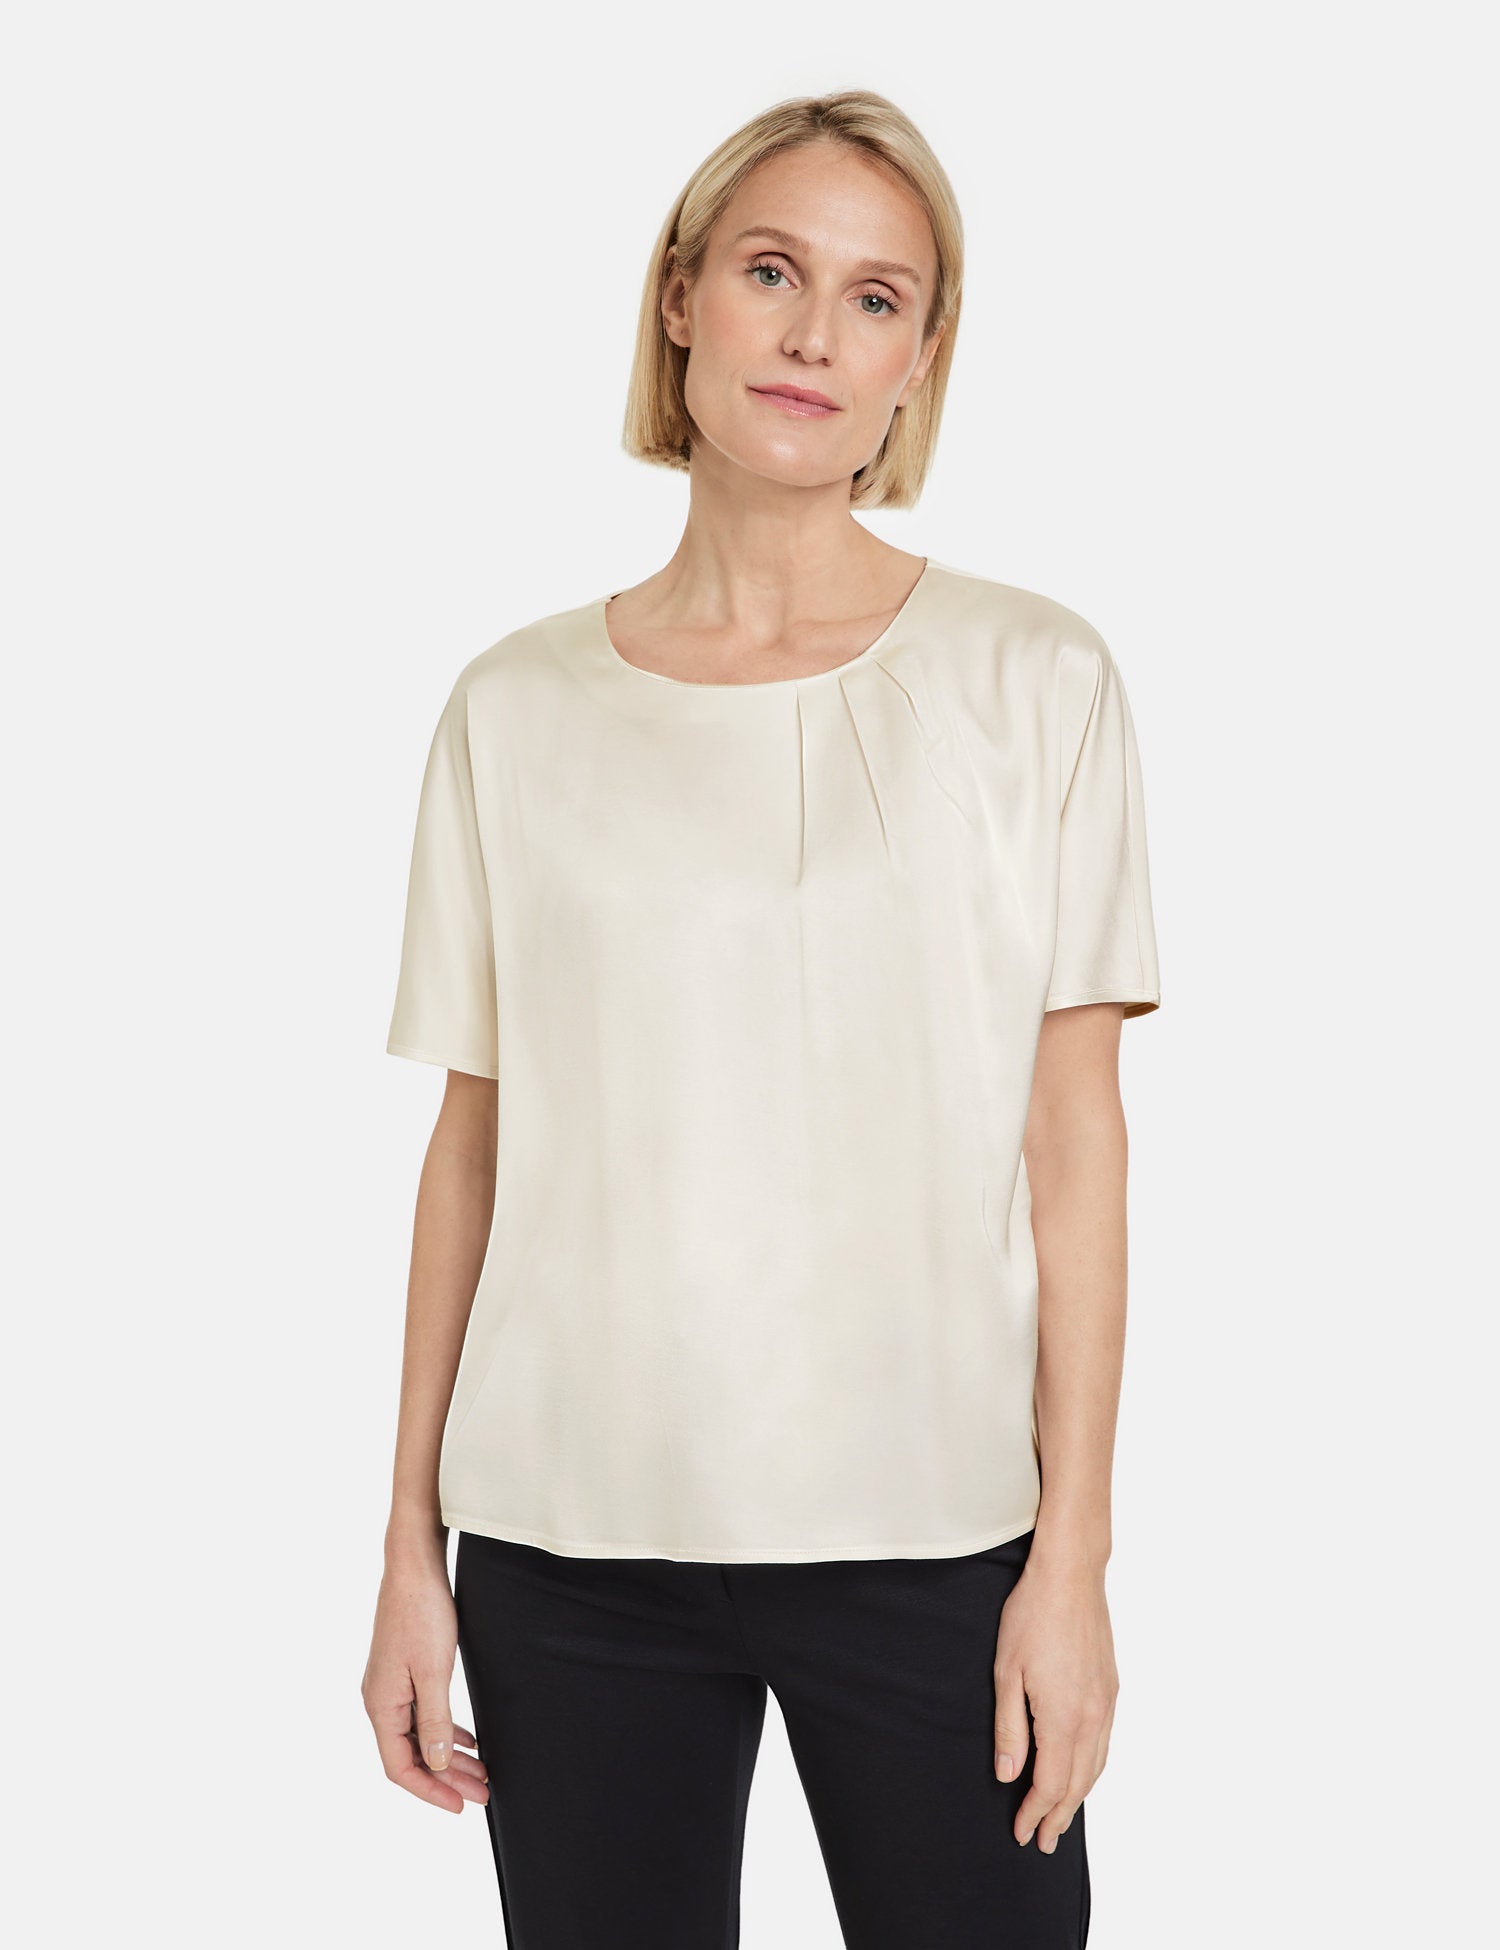 Flowing Blouse Top With Fabric Panelling_977047-35033_90118_01